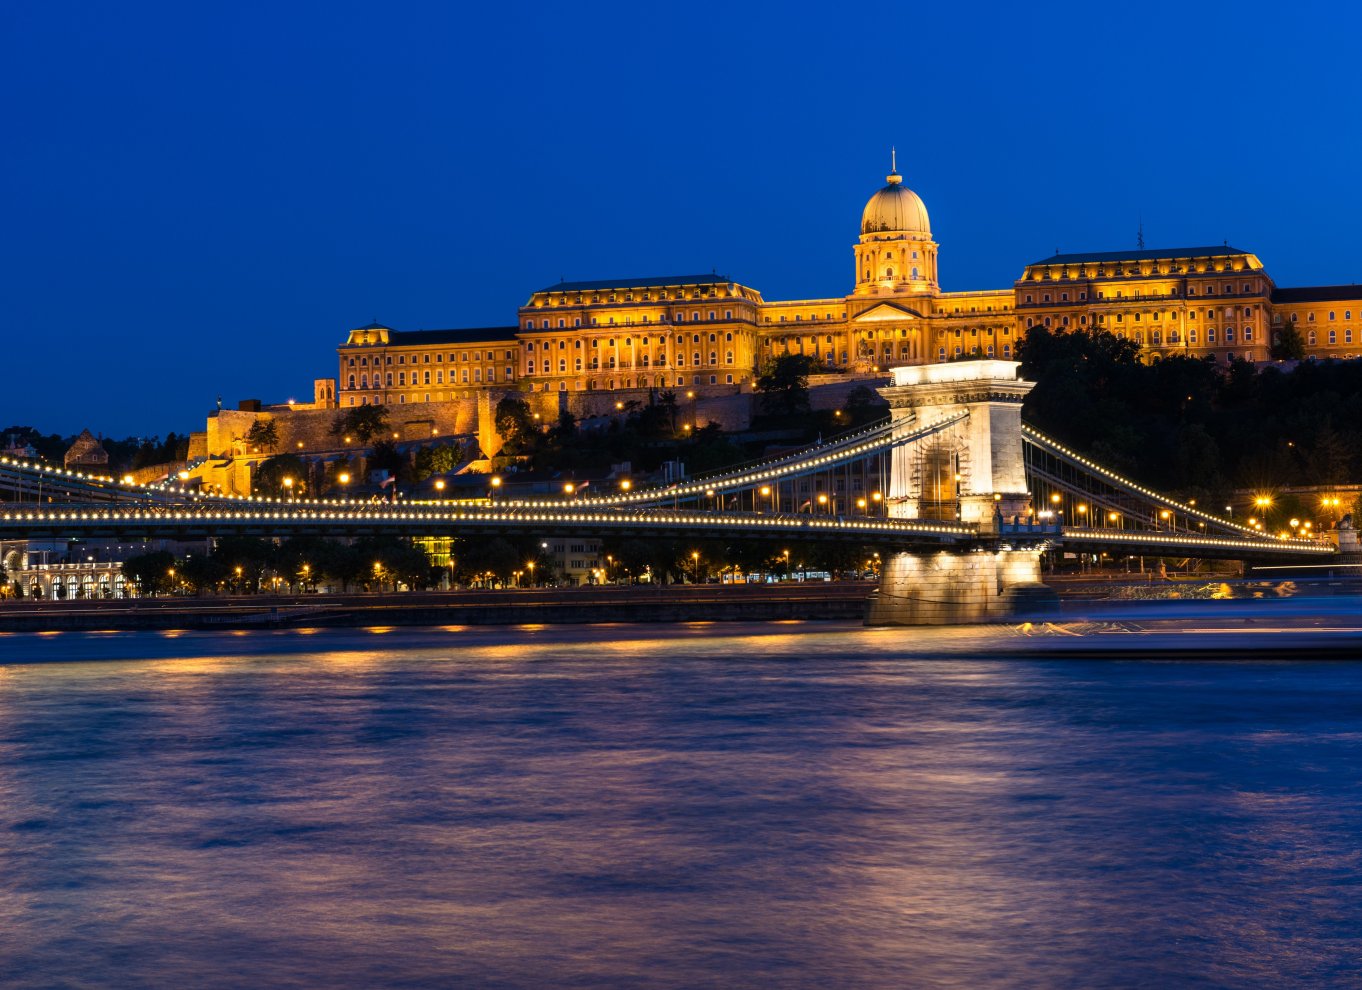 budapest evening sightseeing cruise and unlimited prosecco